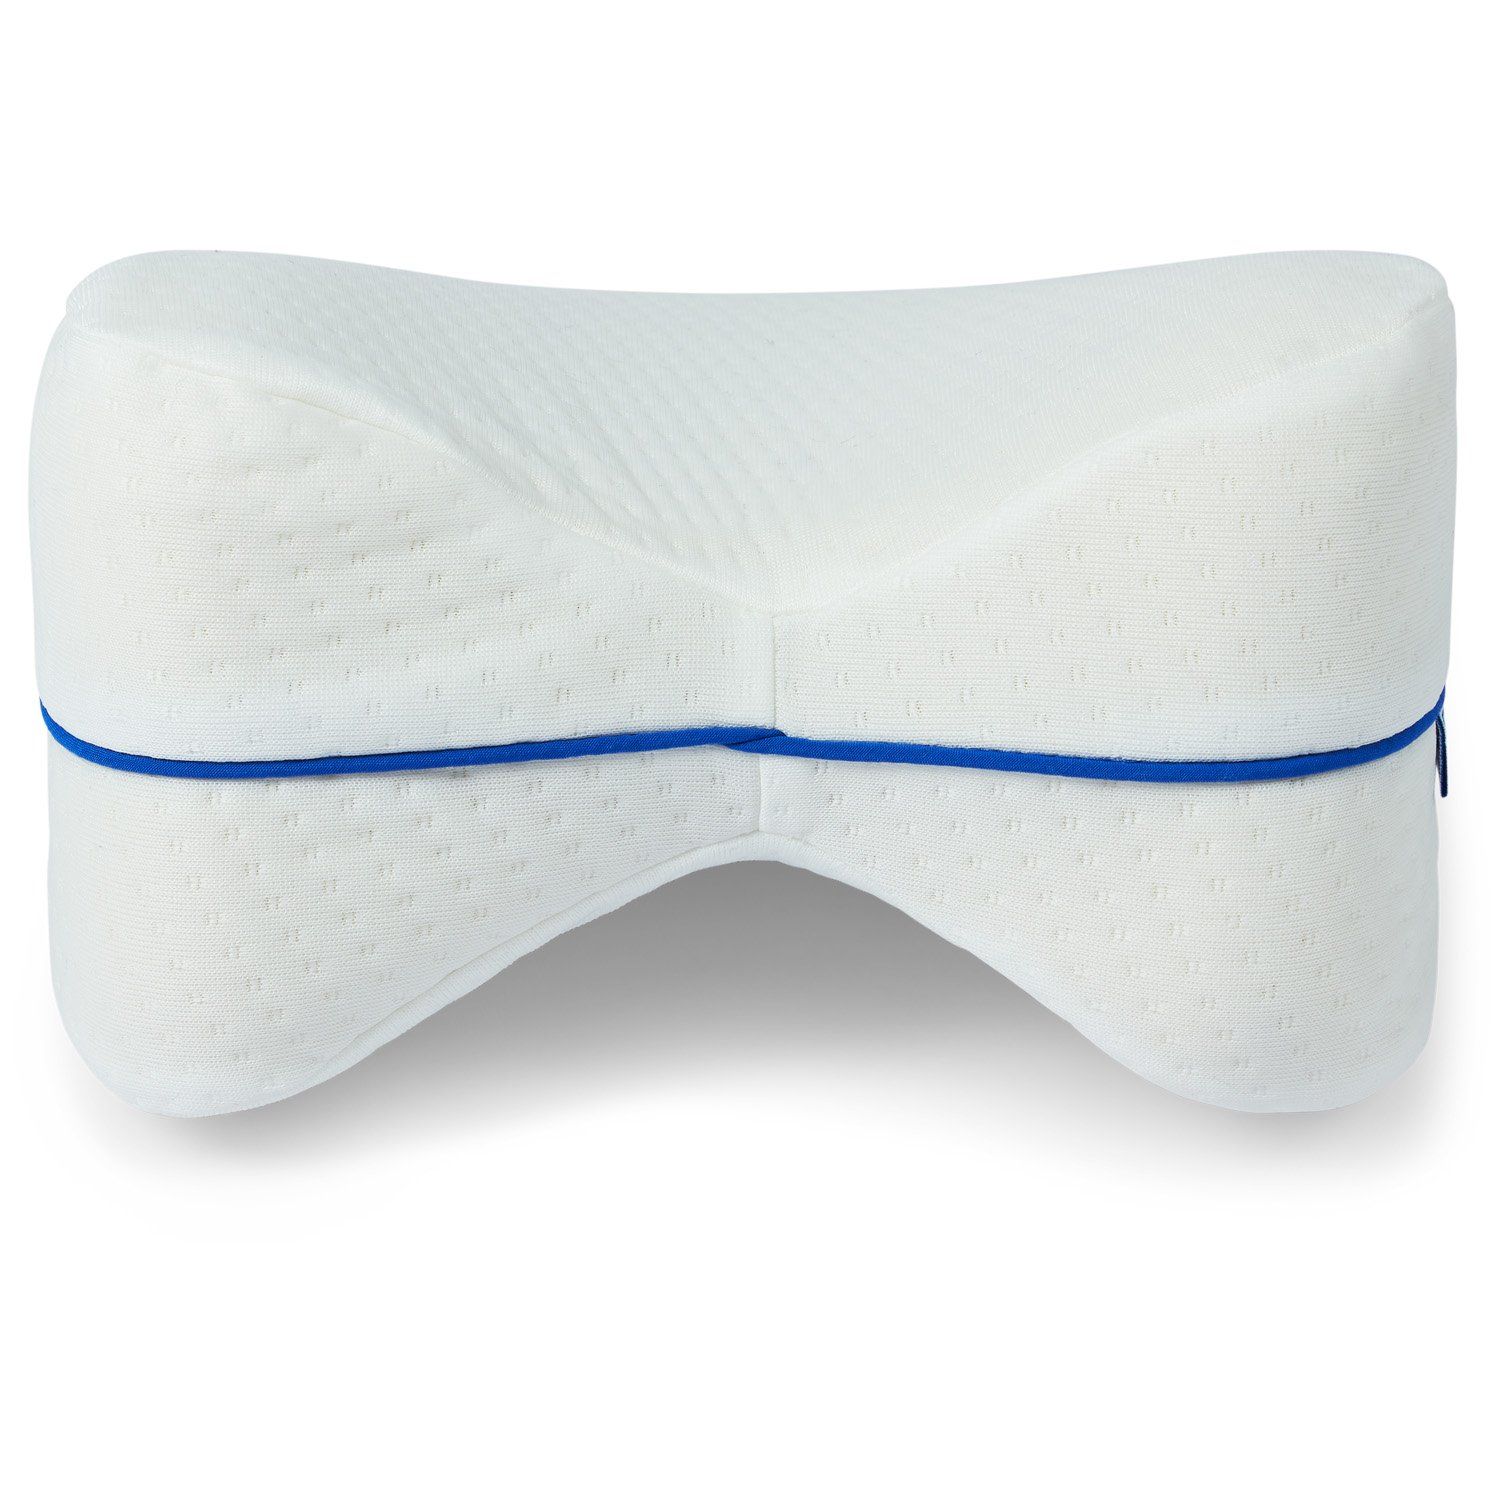 dunimed dunicare leg pillow pictured from behind